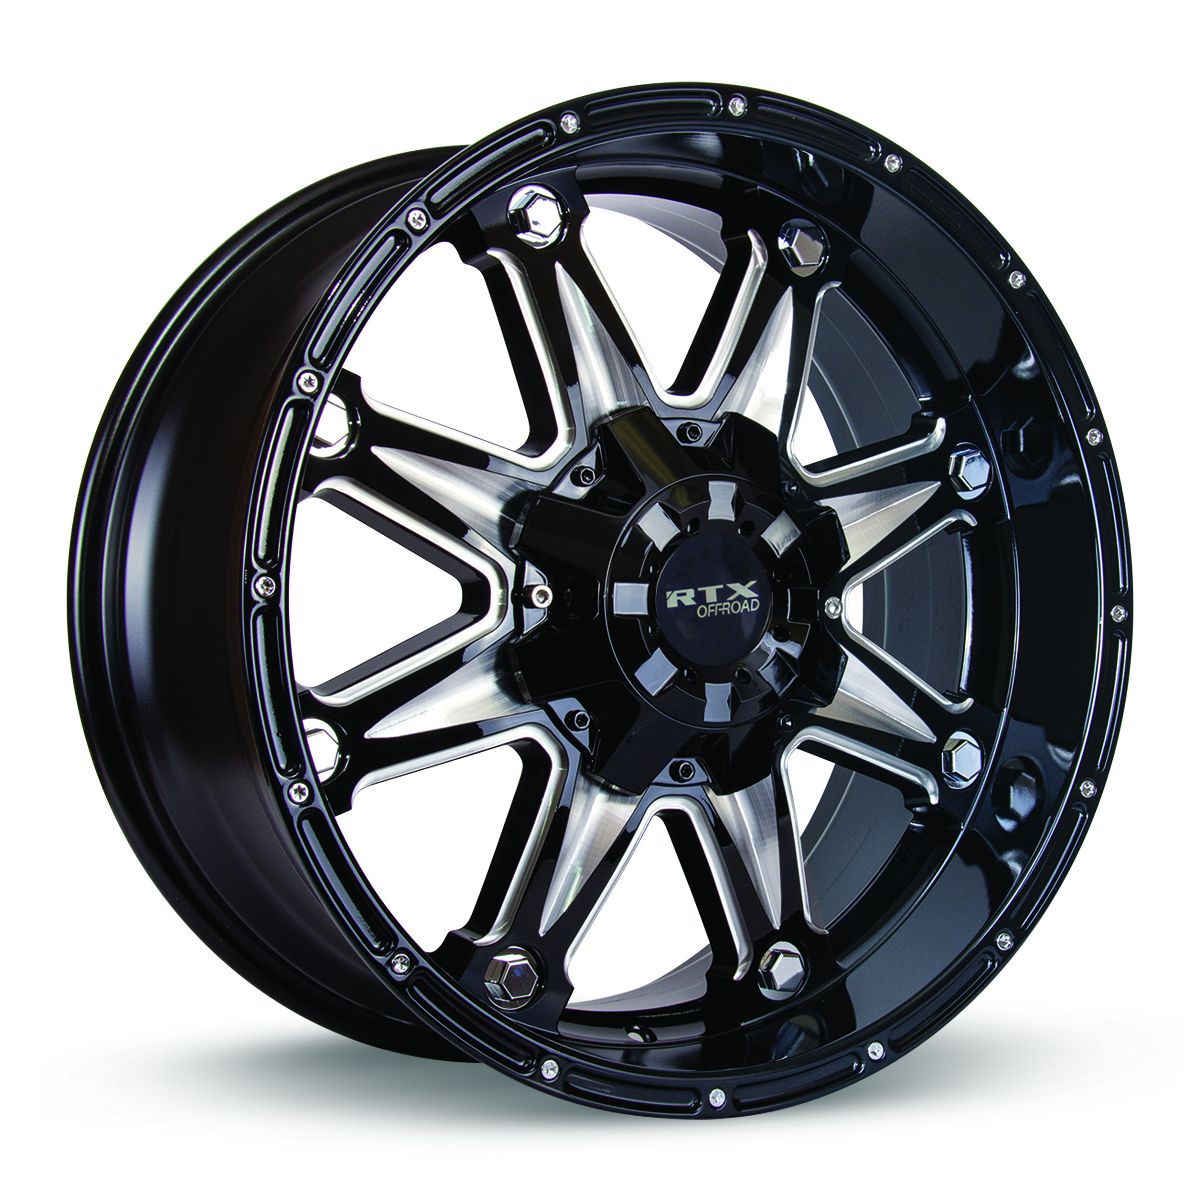 Spine • Black with Milled Spokes • 20x9 6x139.7 ET10 CB106.1